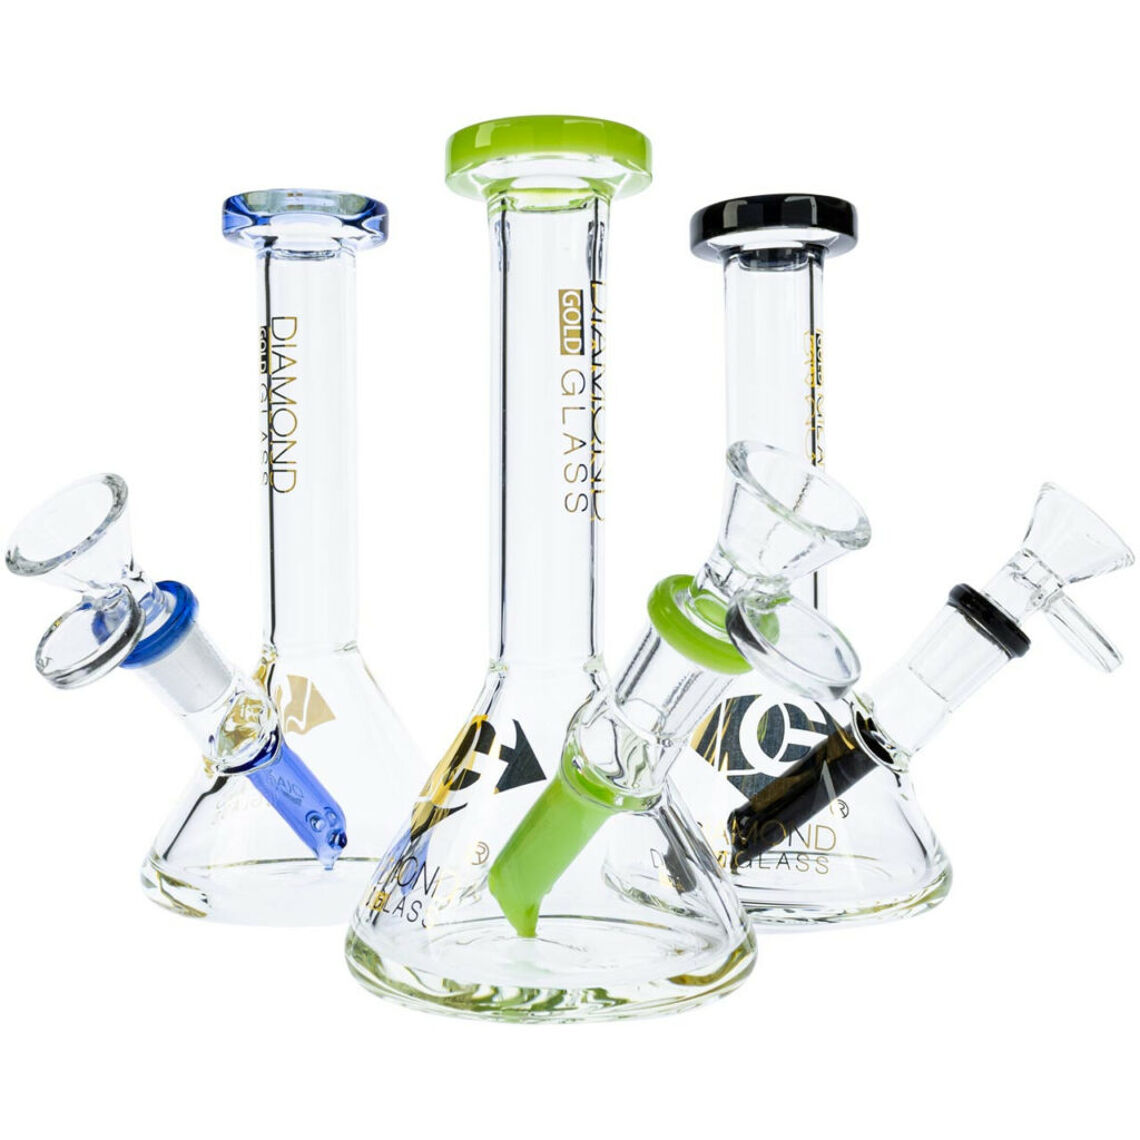 81841-G1-Diamond-Glass-6-inch-Mini-Beaker-Bongs-assorted-colors-in-one-picture__42497-1024x1024